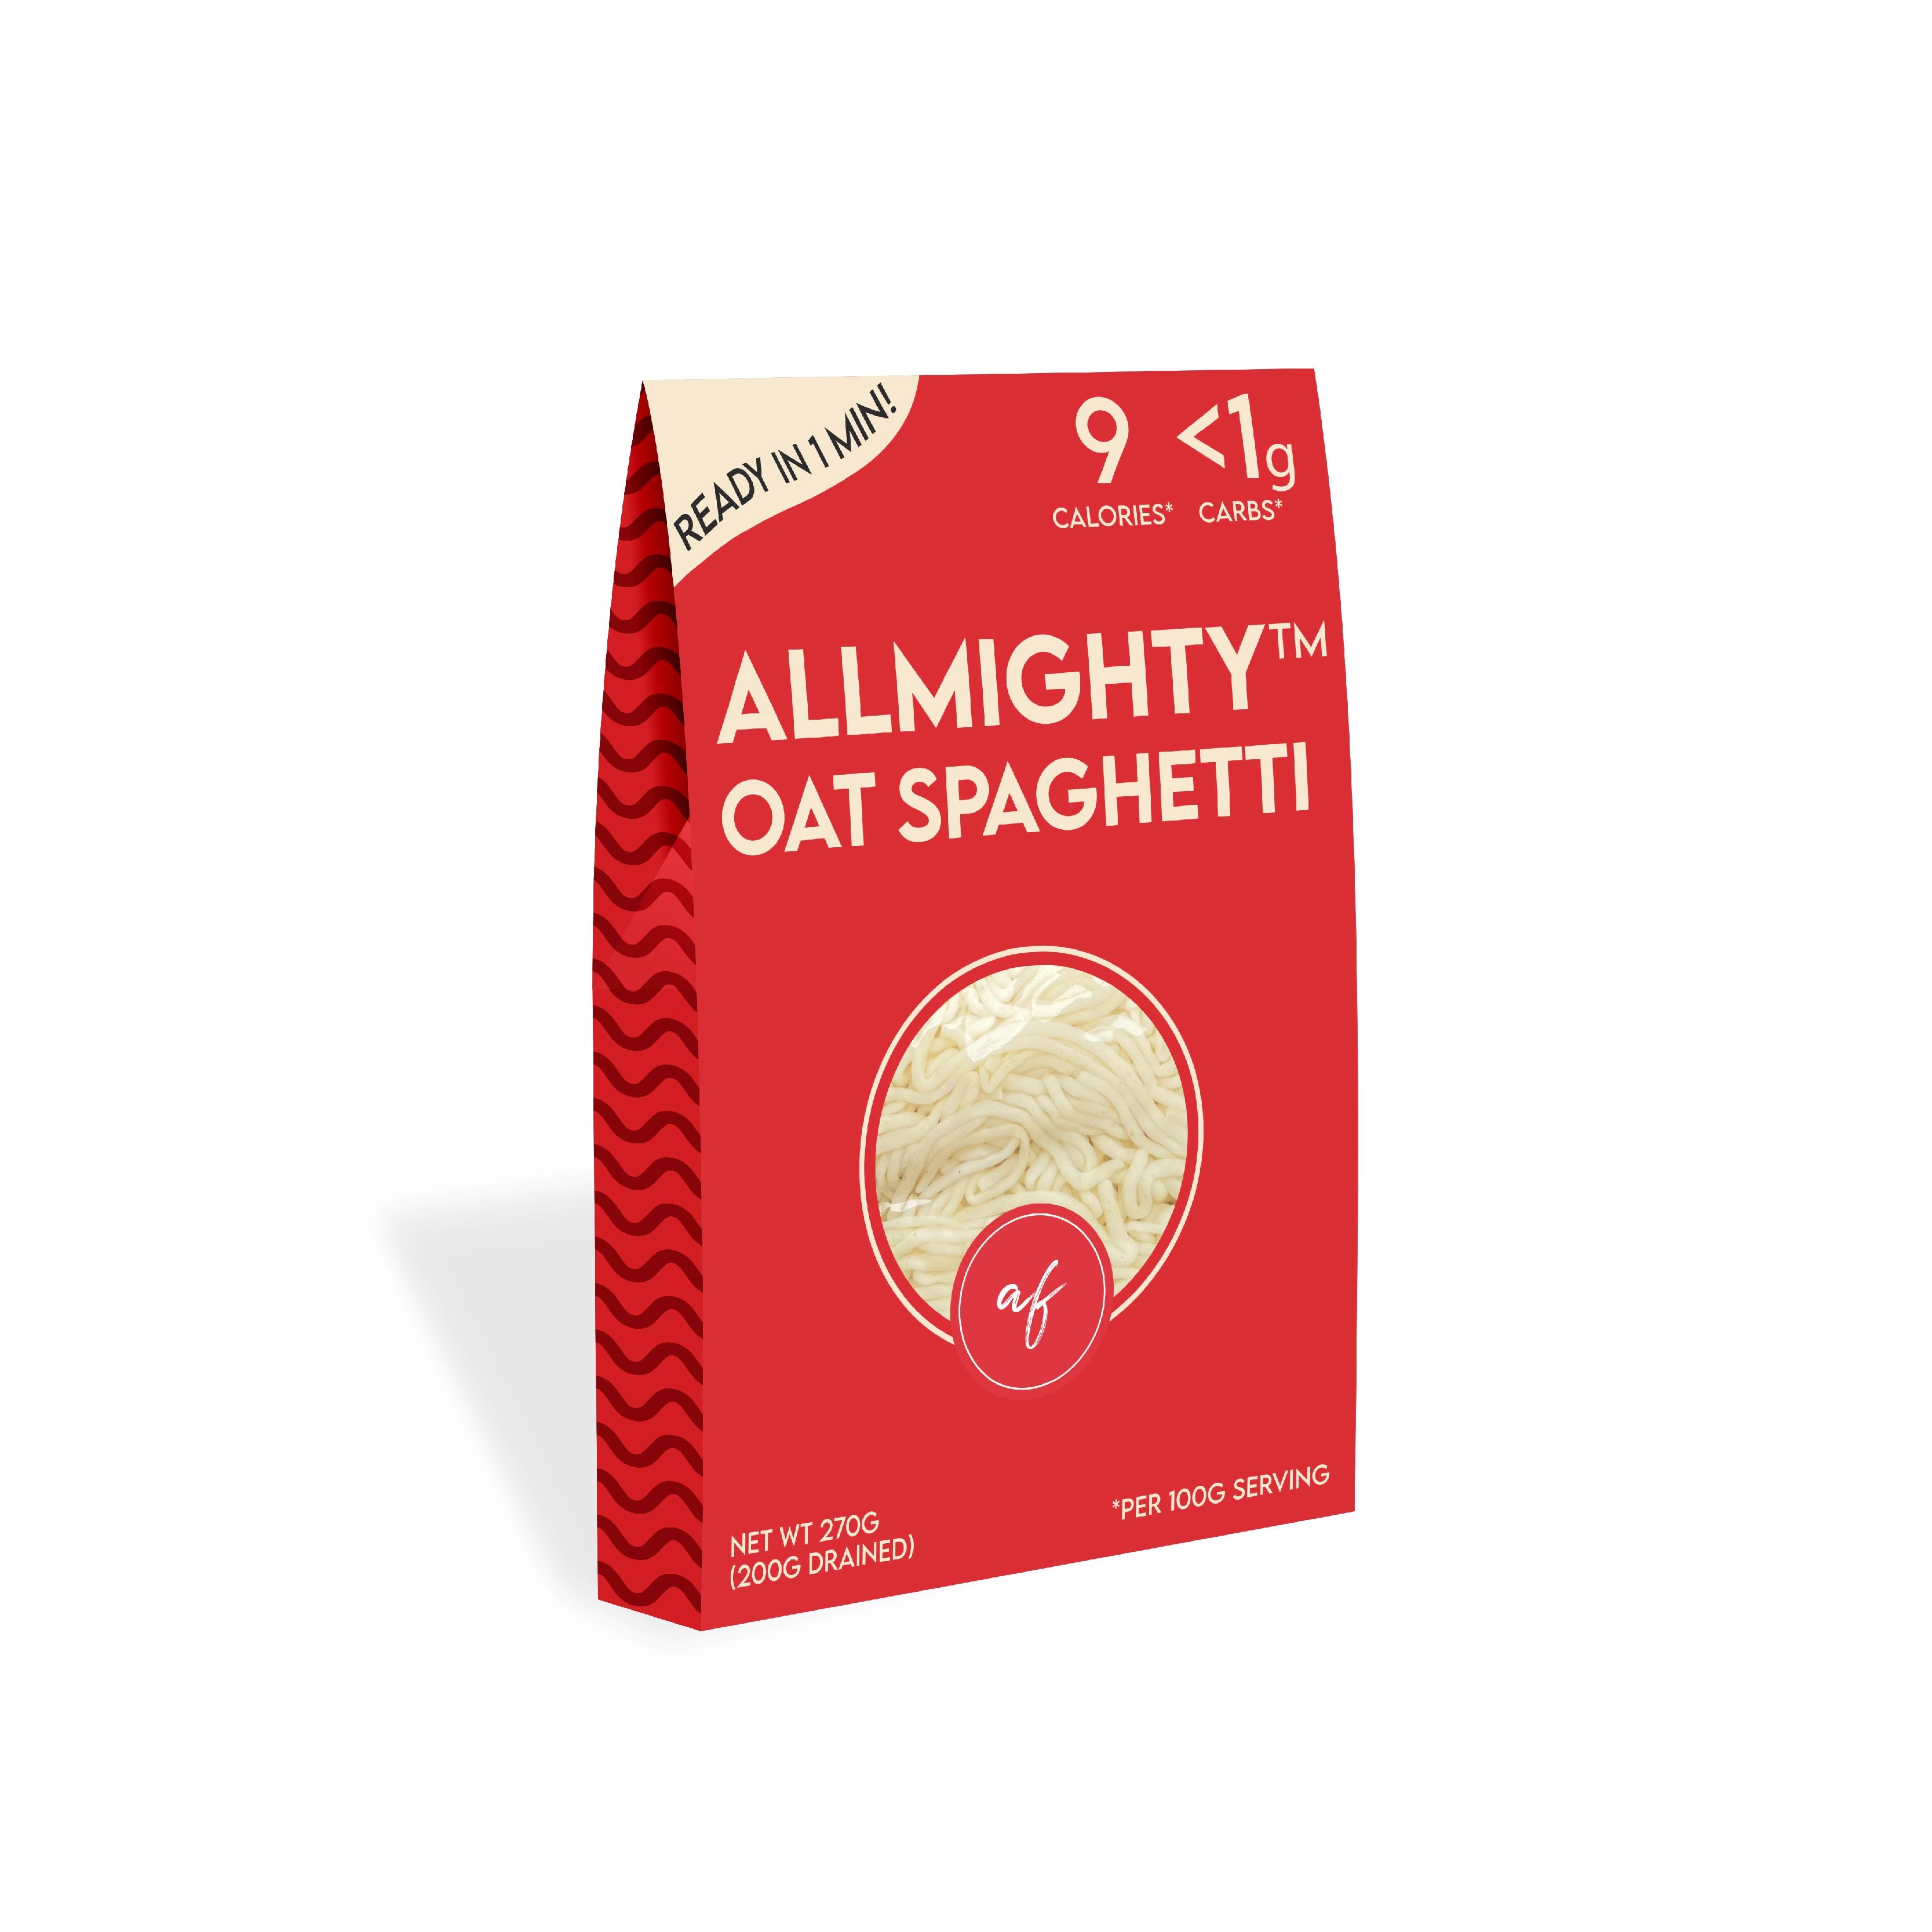 Allmighty Oat Spaghetti (3 PACK)